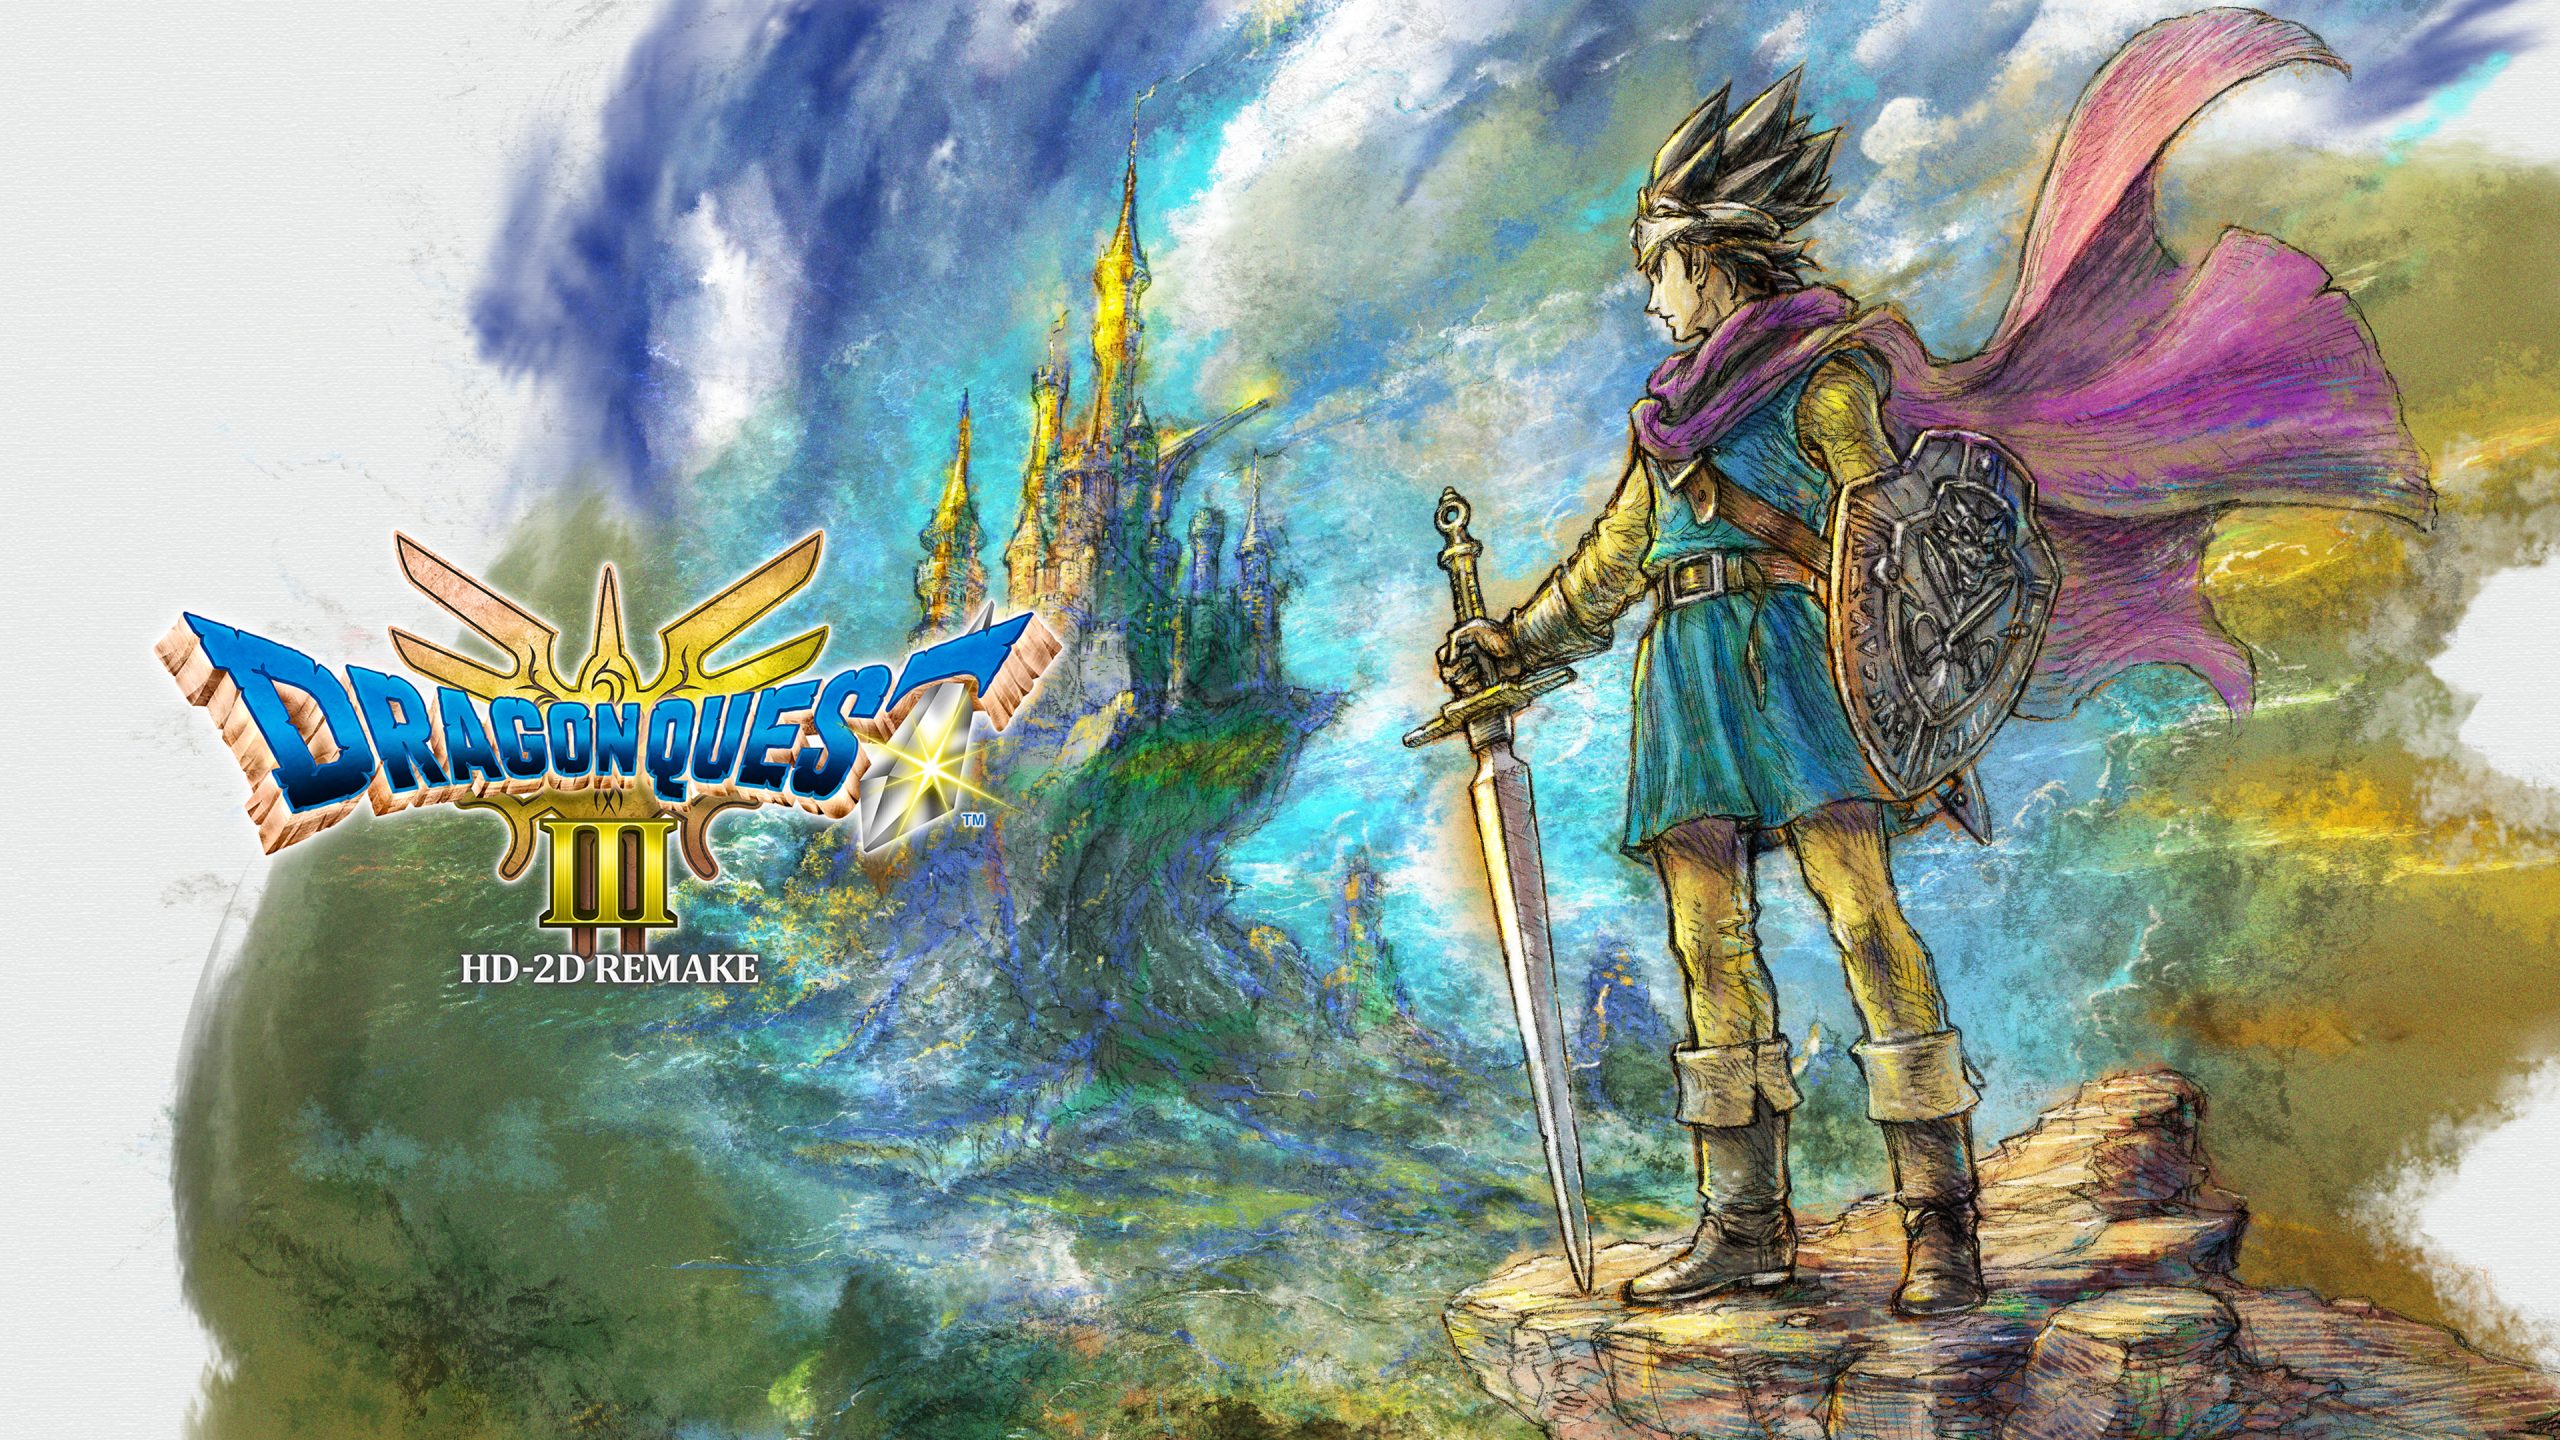 Dragon Quest III HD-2D ushers in the original console masterpiece this year